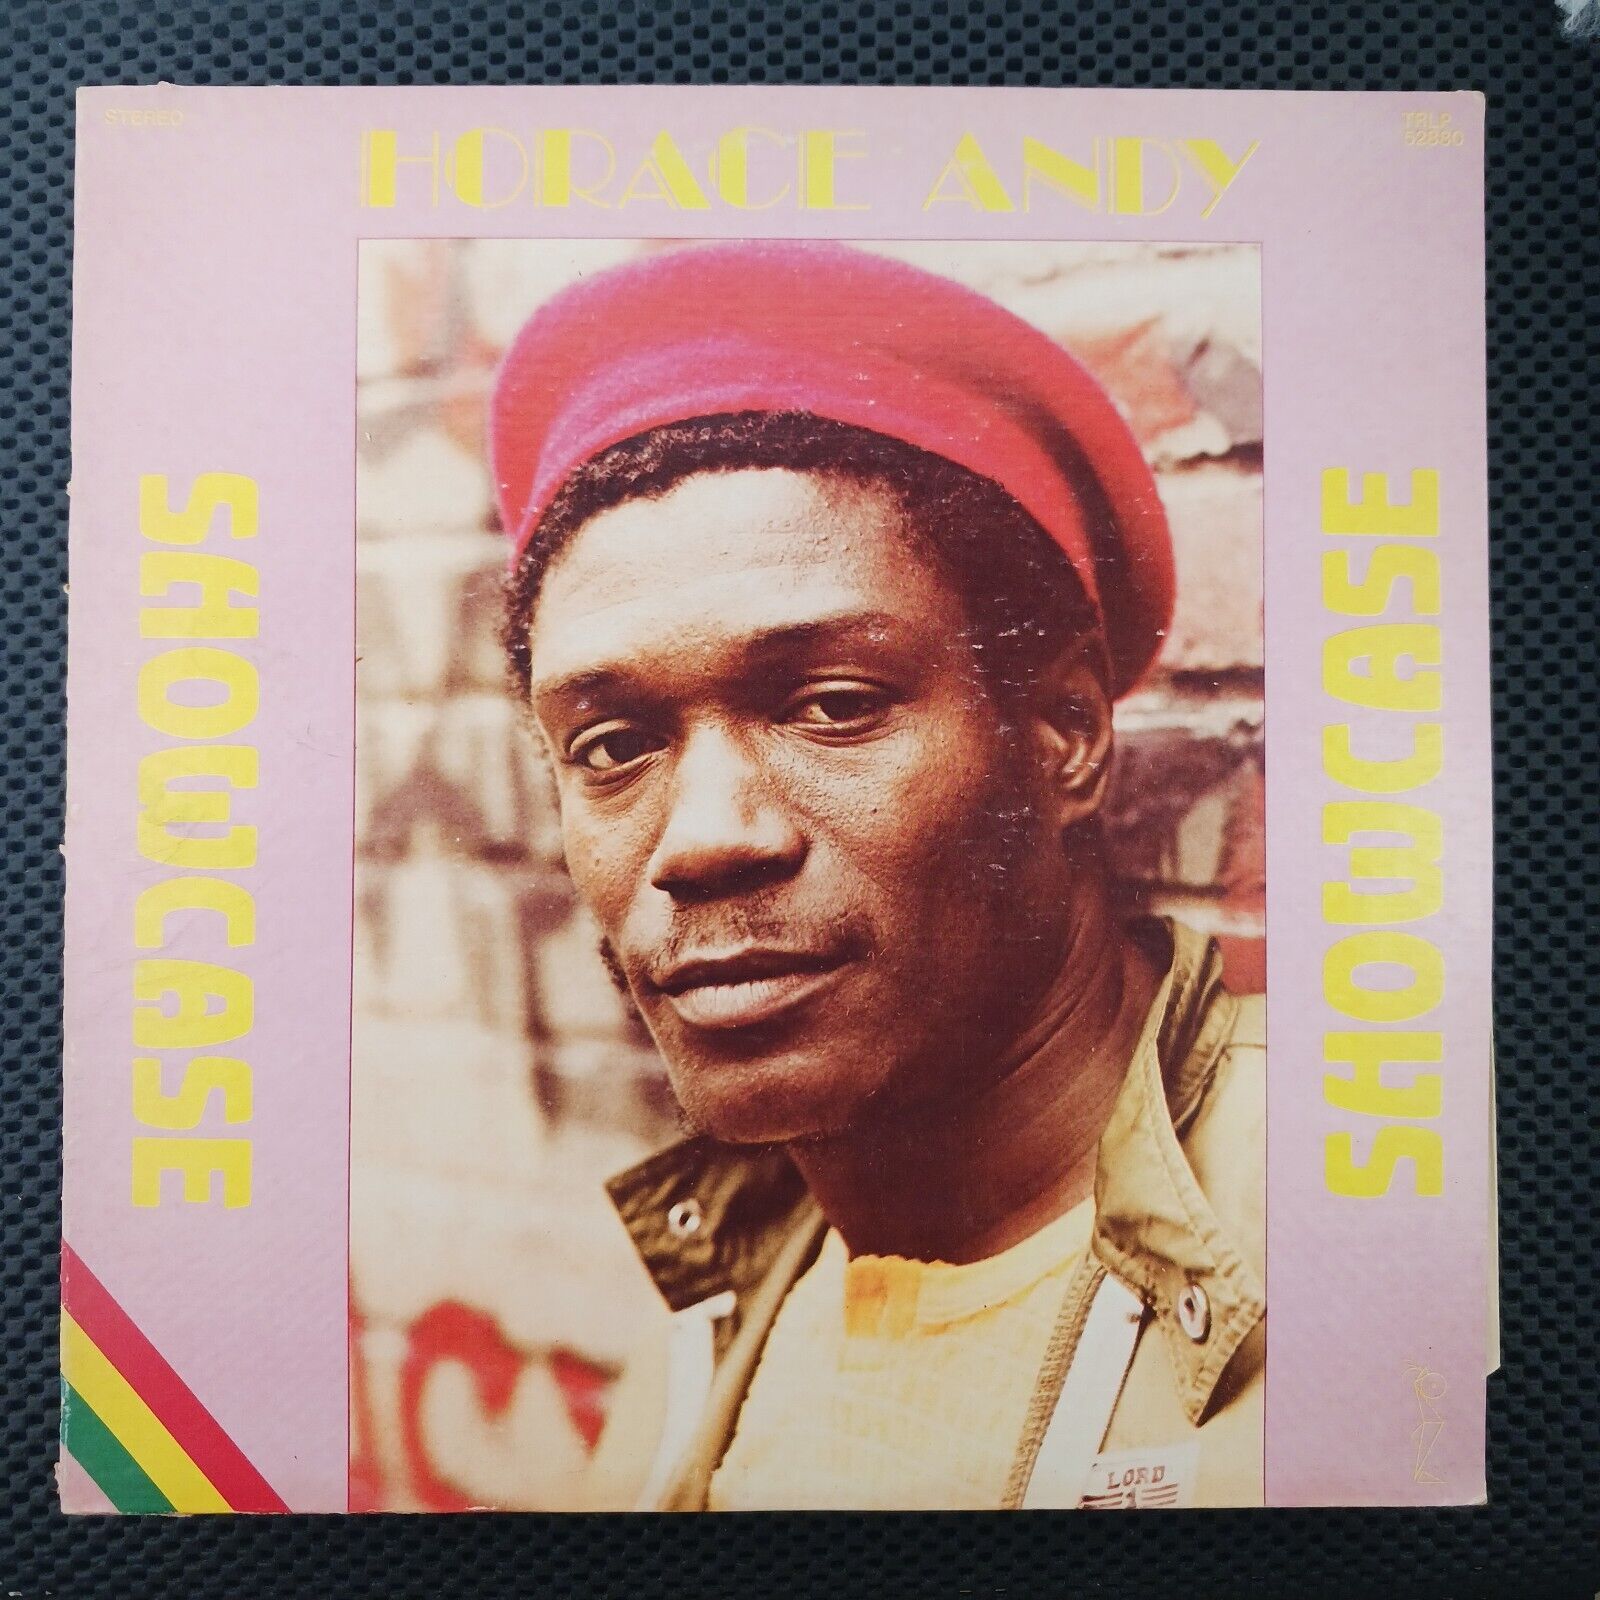 Horace Andy – Showcase (Tad's Record – TRD LP 52880)